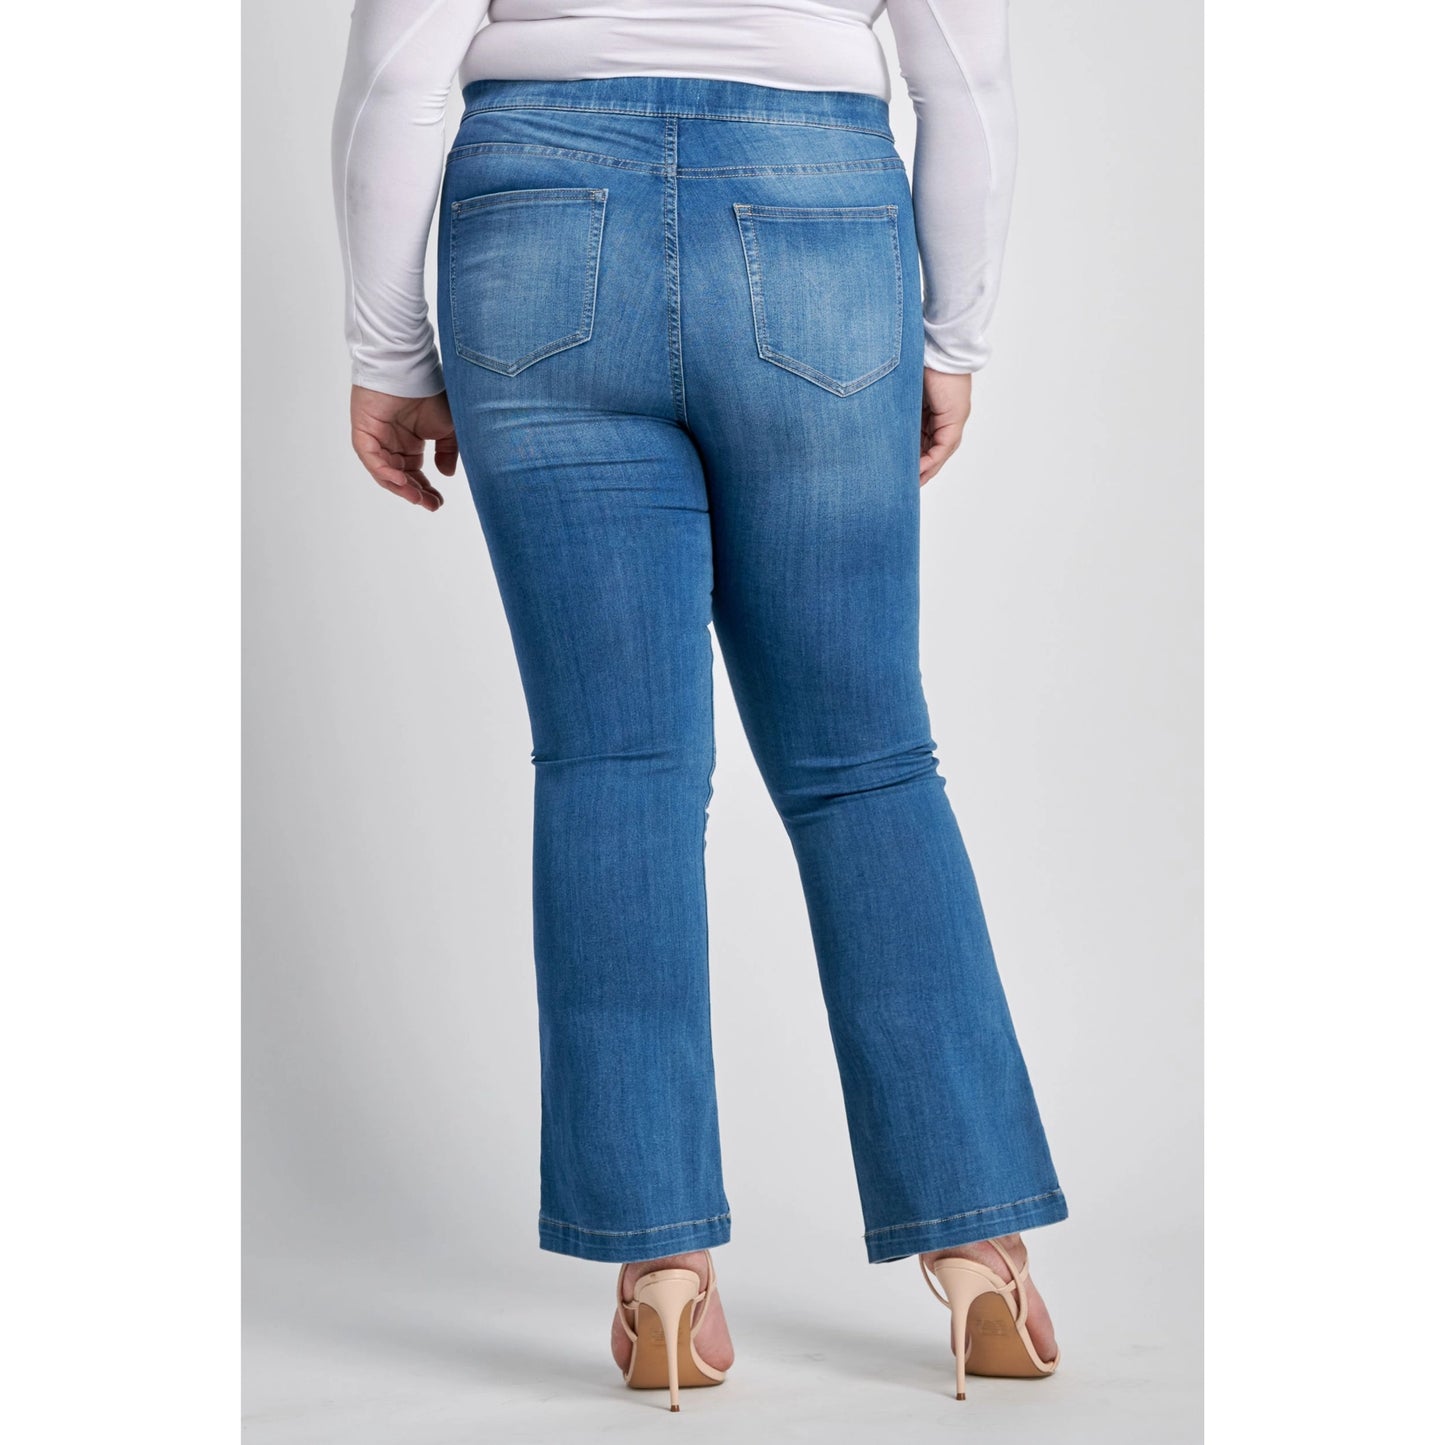 Cello Plus Ultra Stretchy Medium Wash Jeans/Jegging